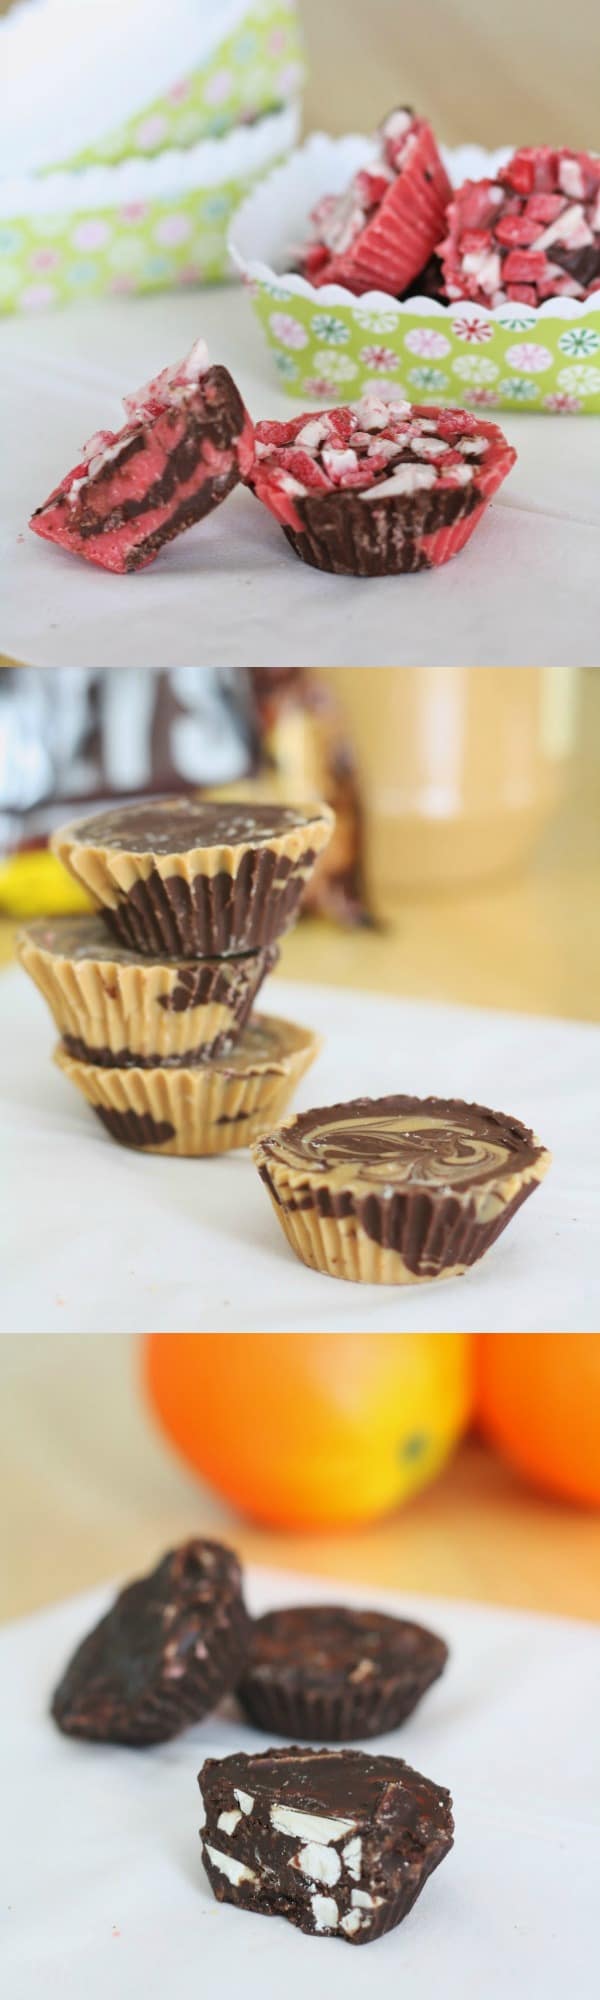 Recipe for three types of chocolate cups